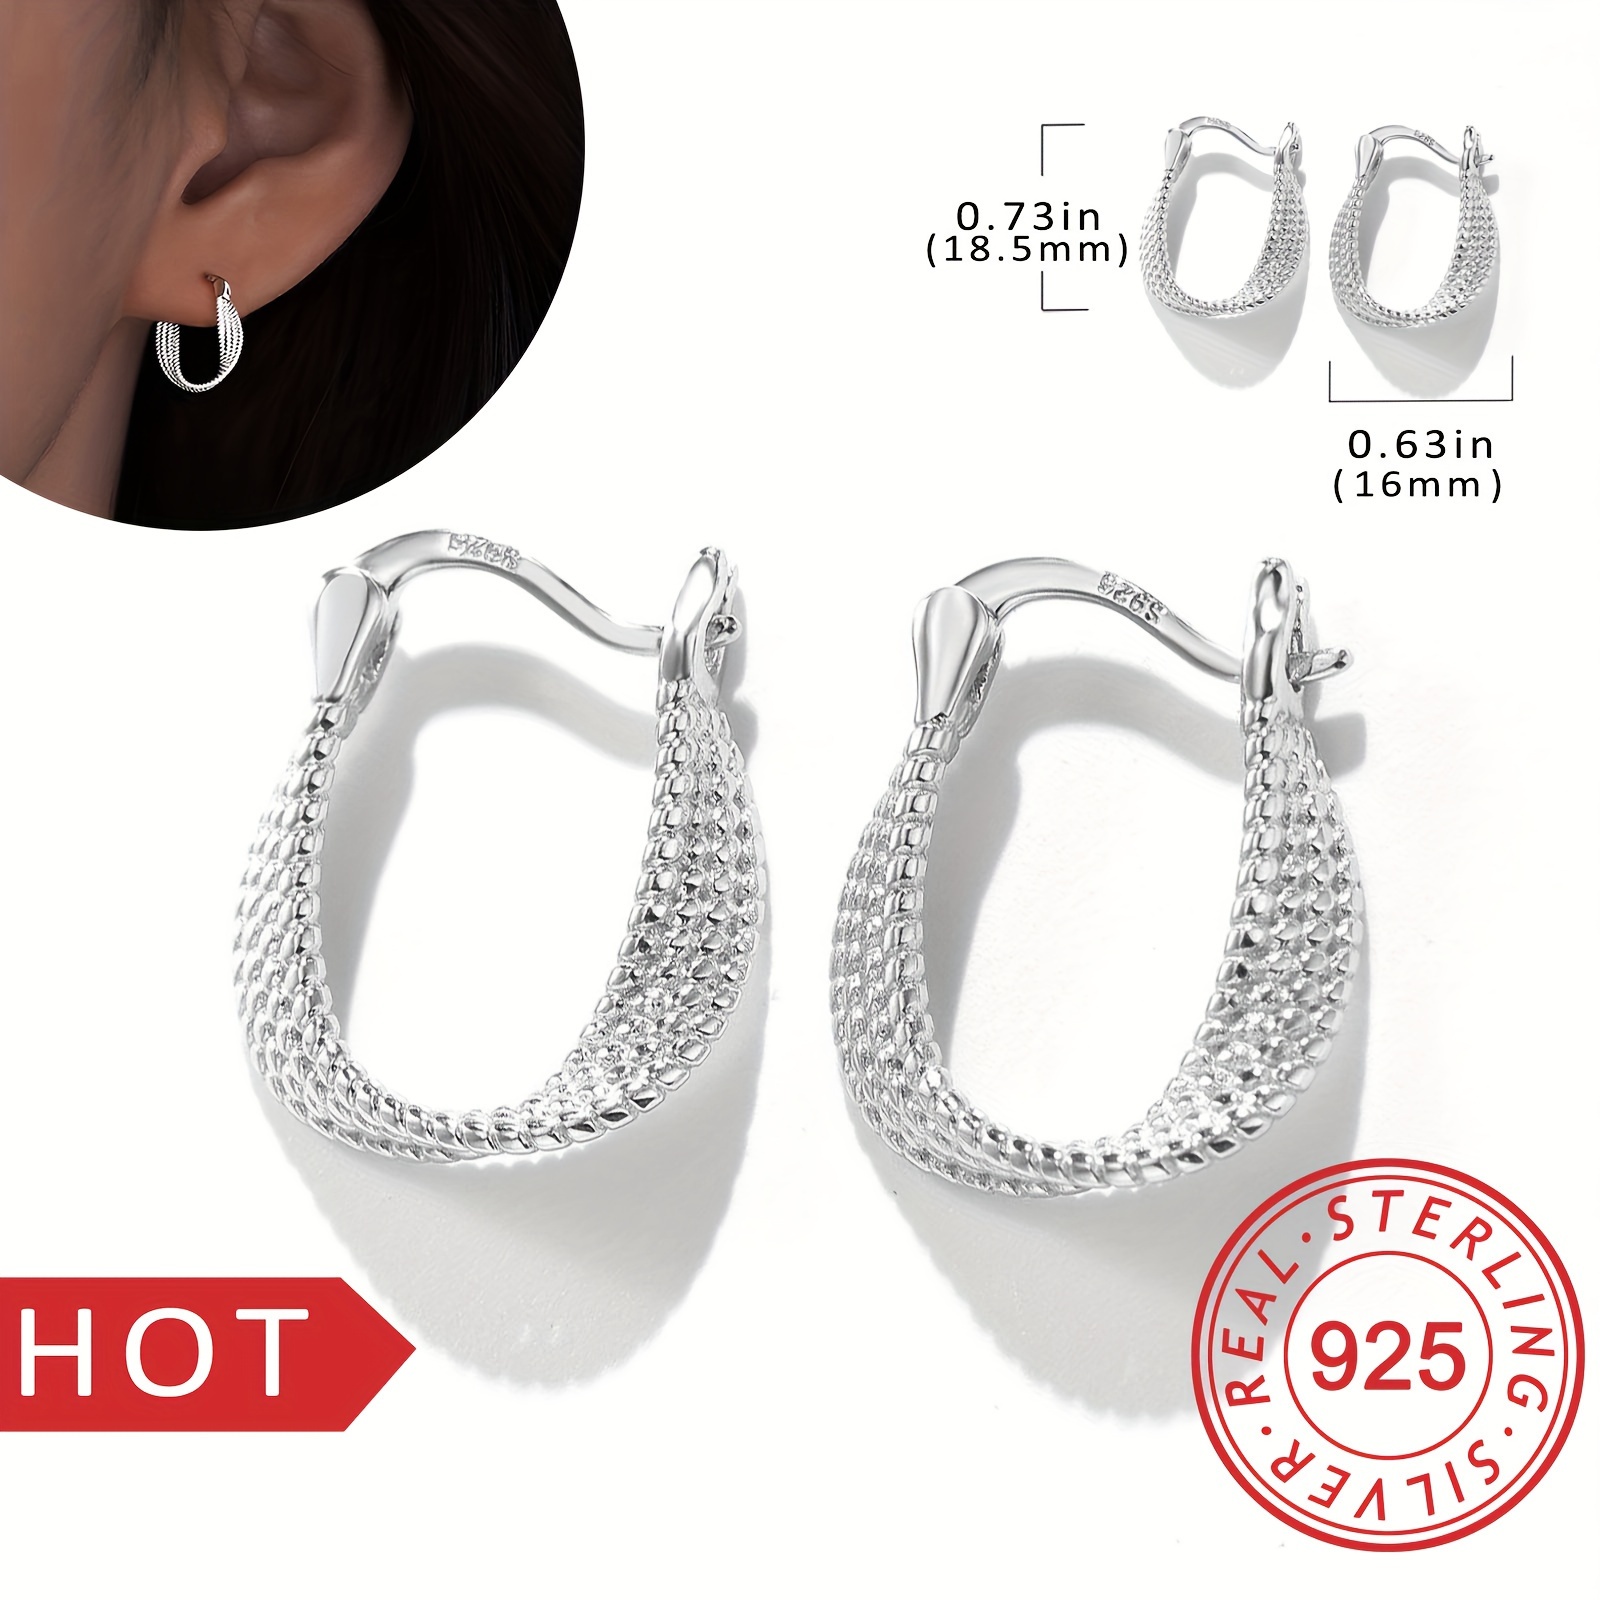 

S925 Sterling Silver Hypoallergenic Twisted Design Hoop Earrings Classic Elegant Style Exquisite Gifts For Women